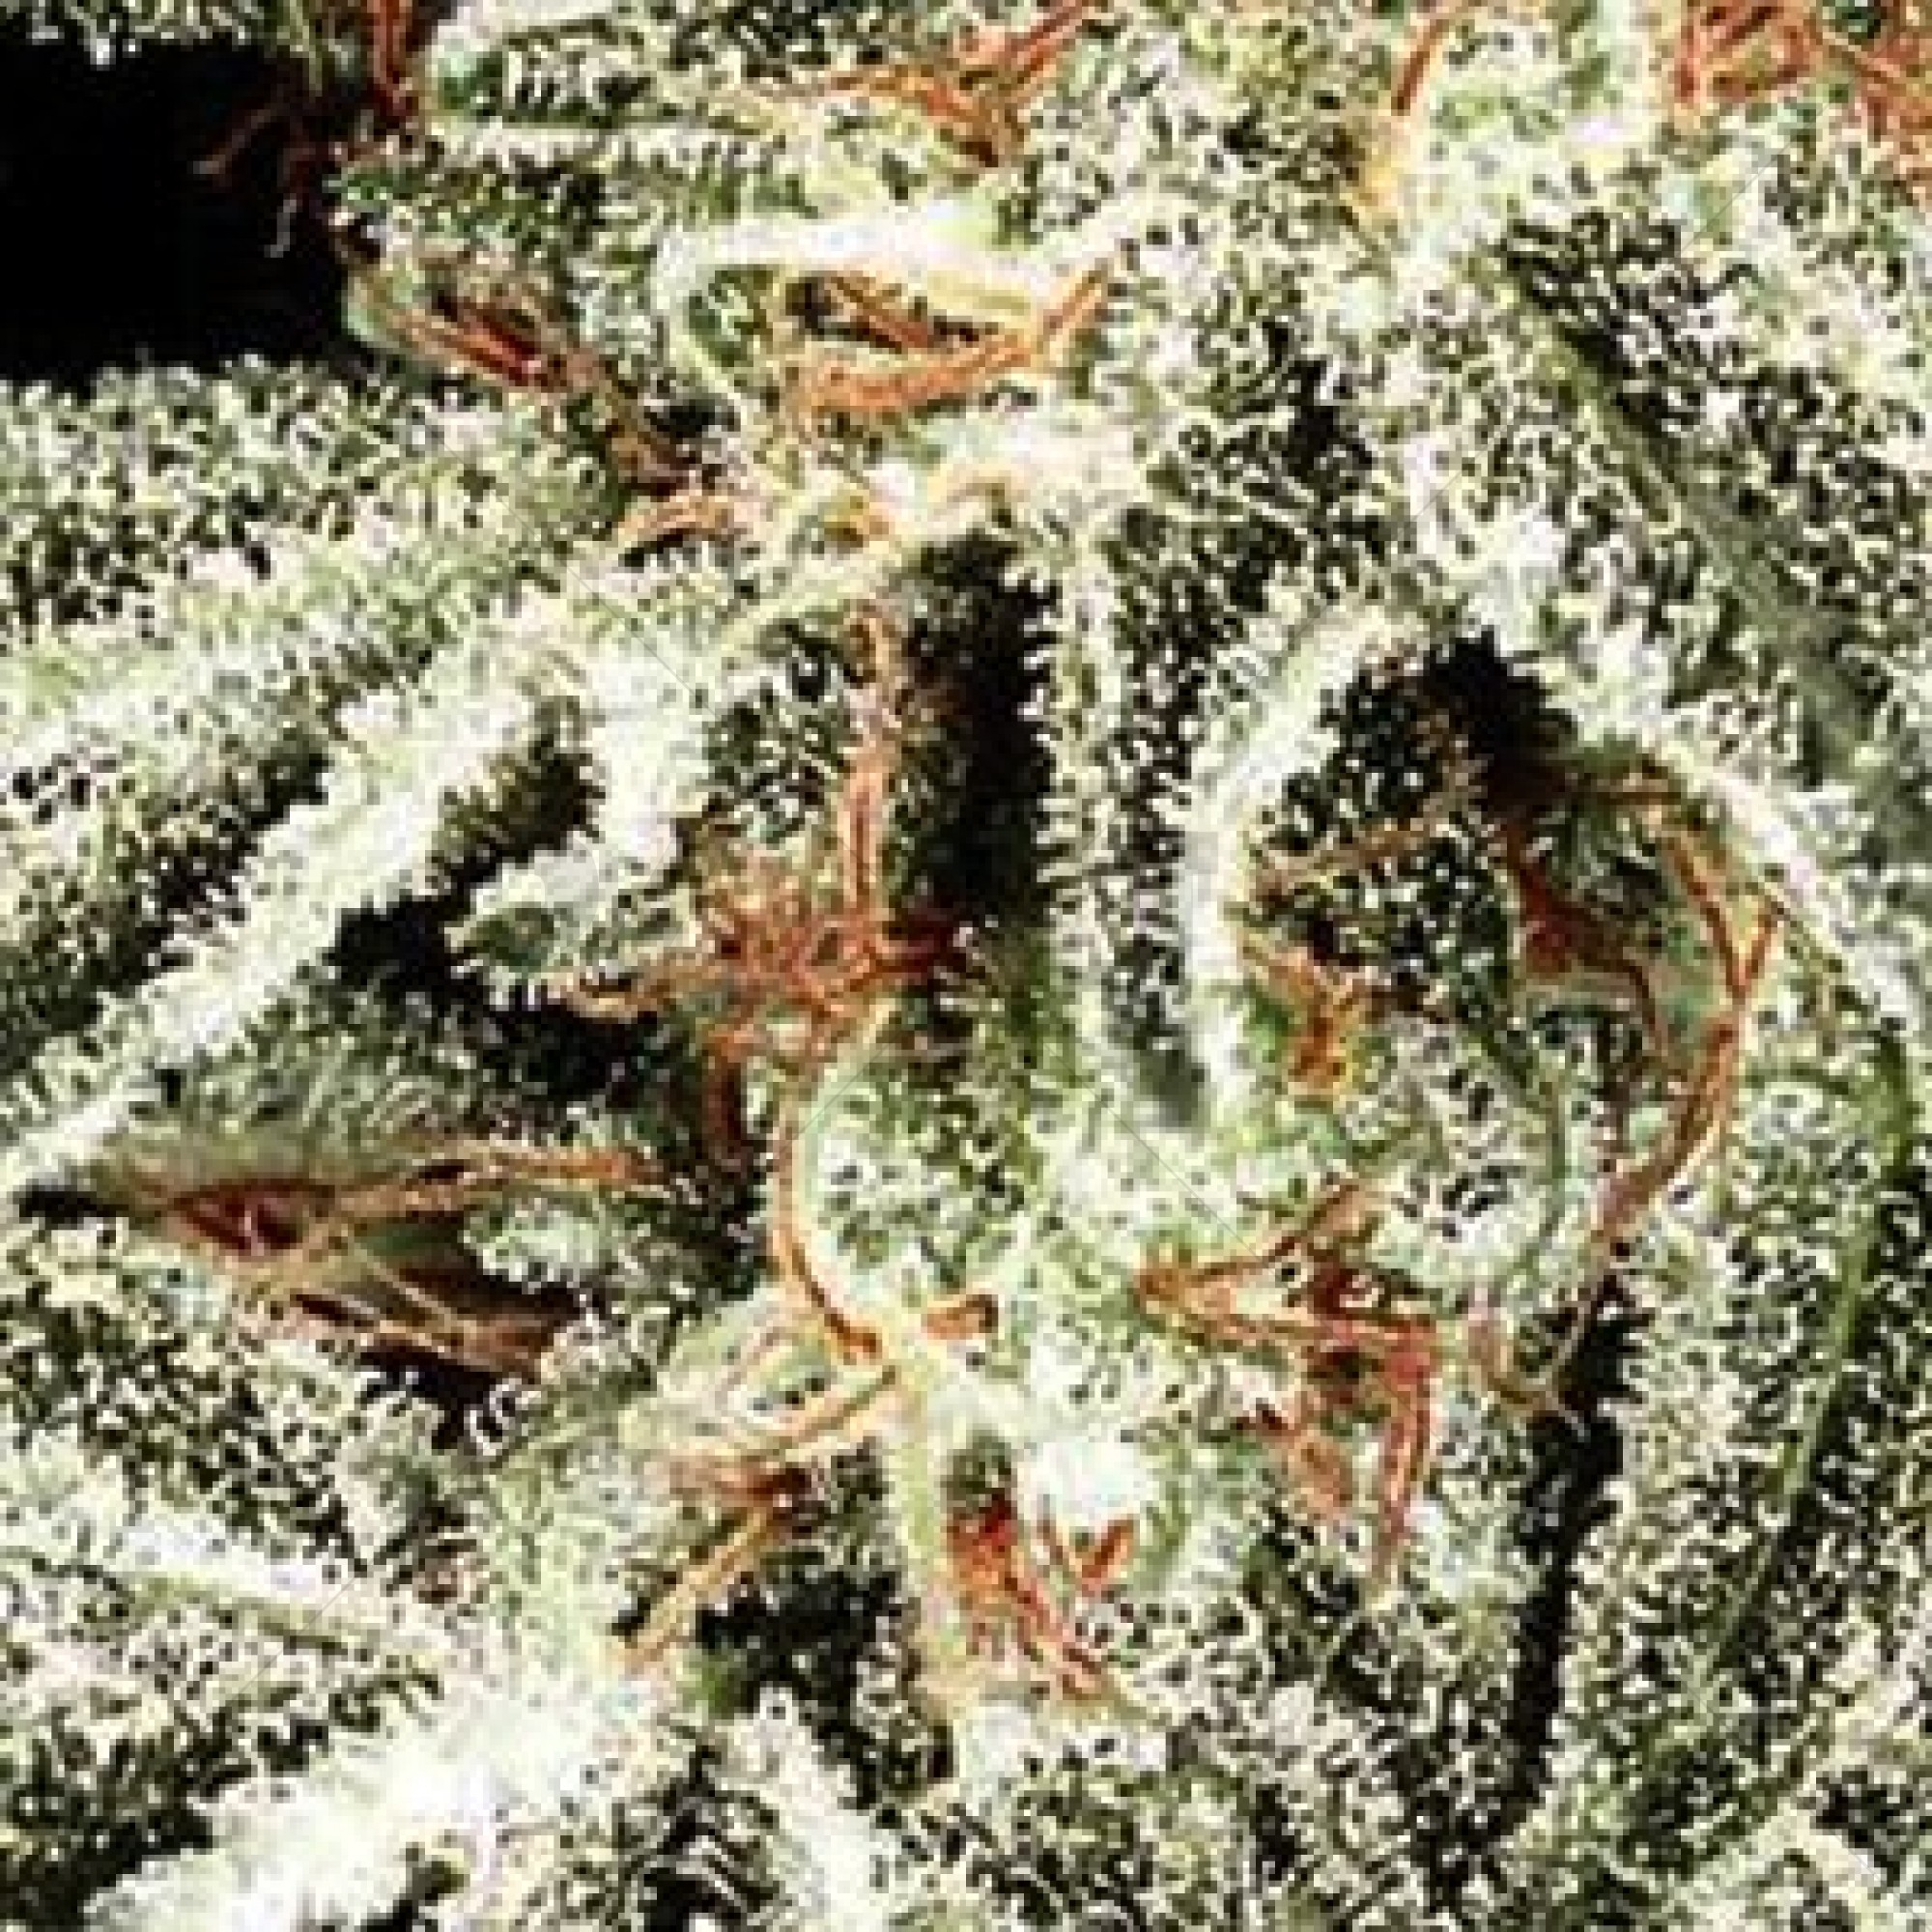 Russian Snow (Vision Seeds)